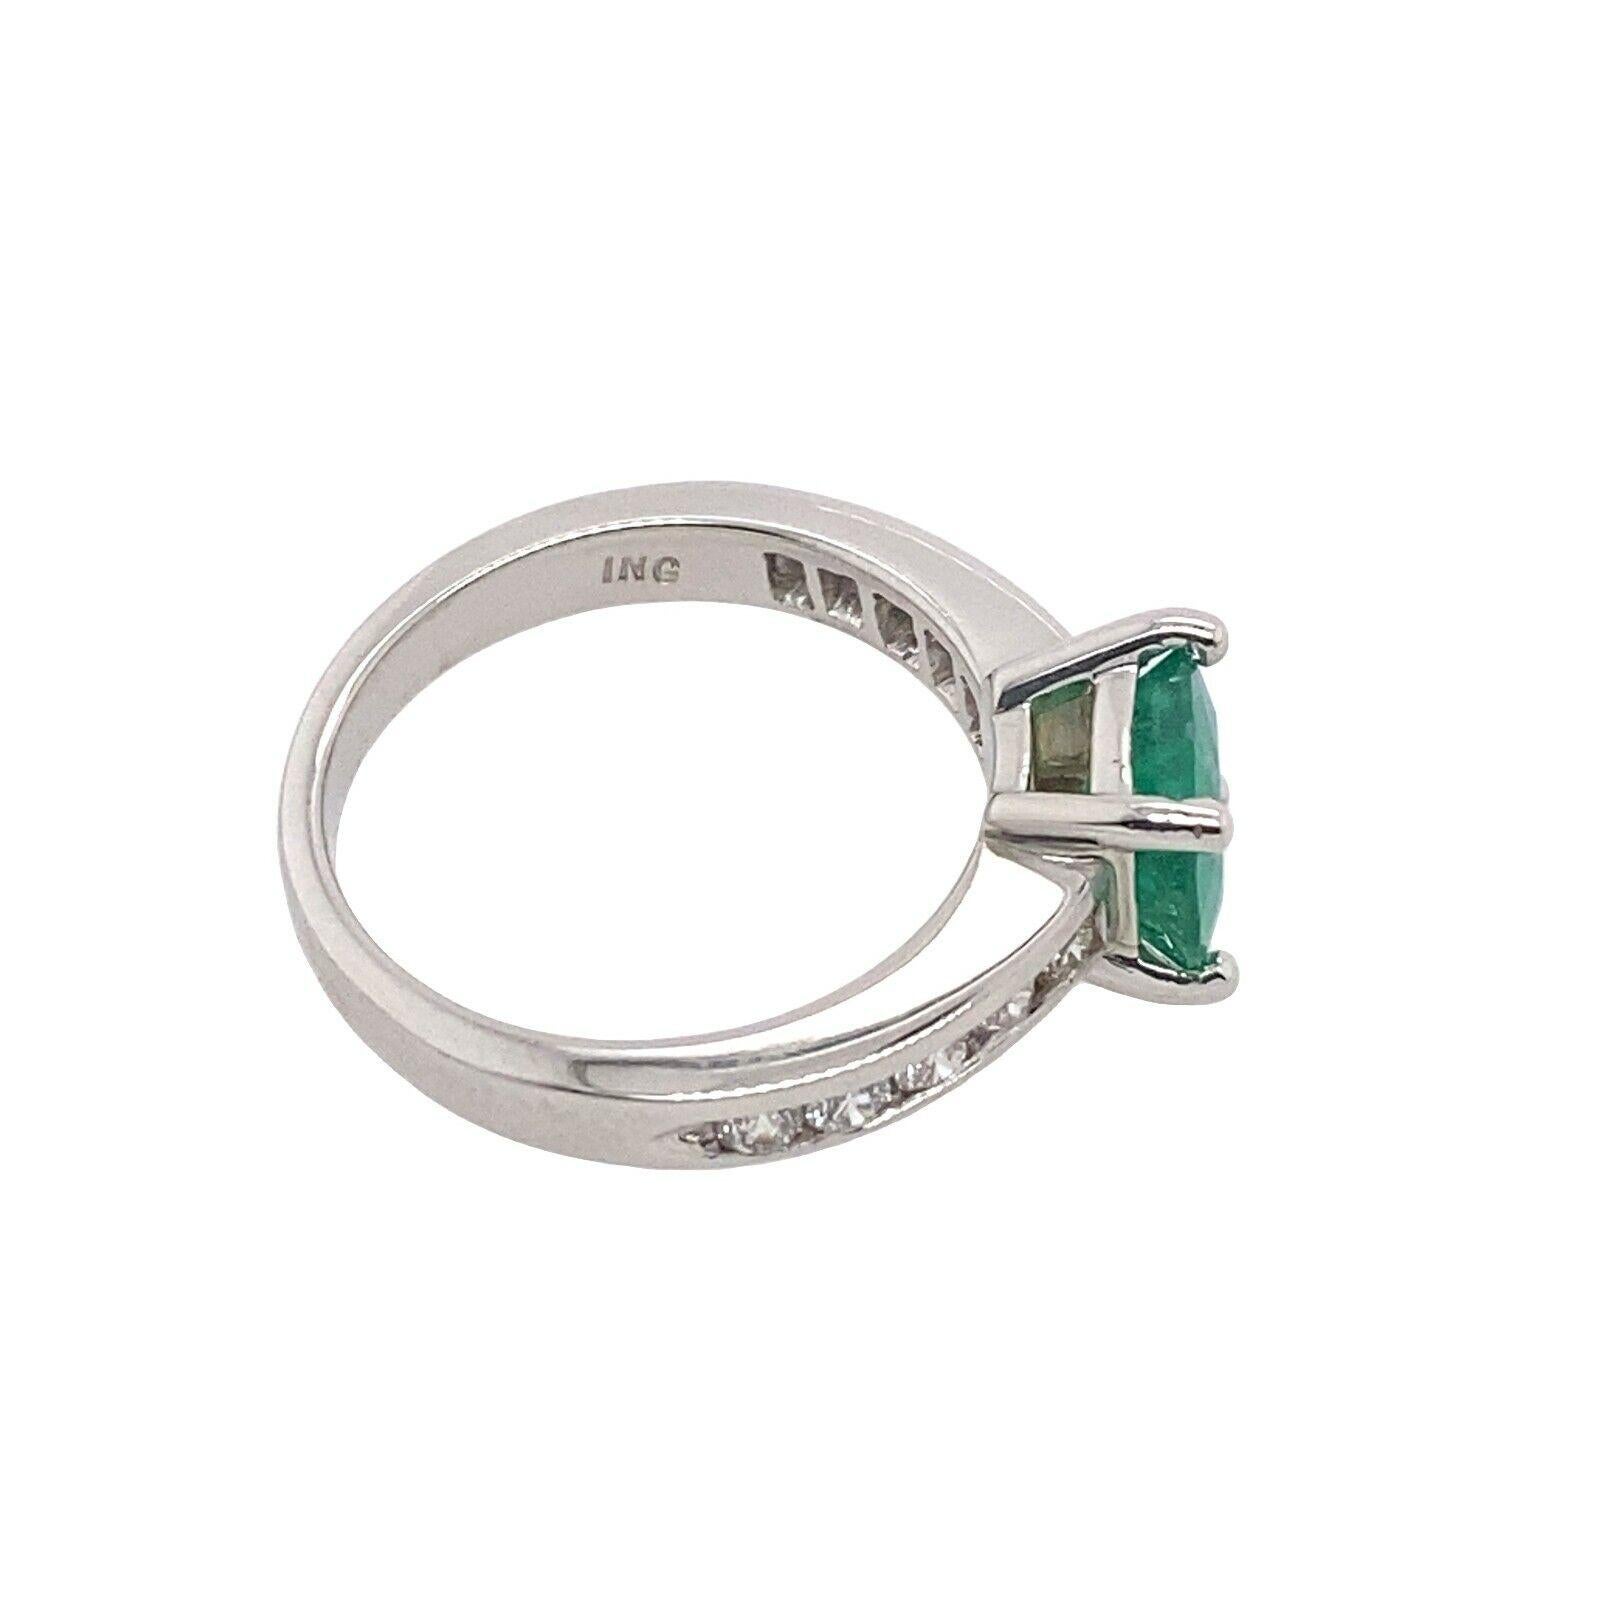 0.90ct Cushion Shape Emerald ⋄ Ring, Set In Platinum Solitaire Ring

This elegant and modern ring features a cushion cut emerald centre stone of 0.90ct, set in Platinum, with 5 round brilliant cut Diamonds on each side.

Additional Information: